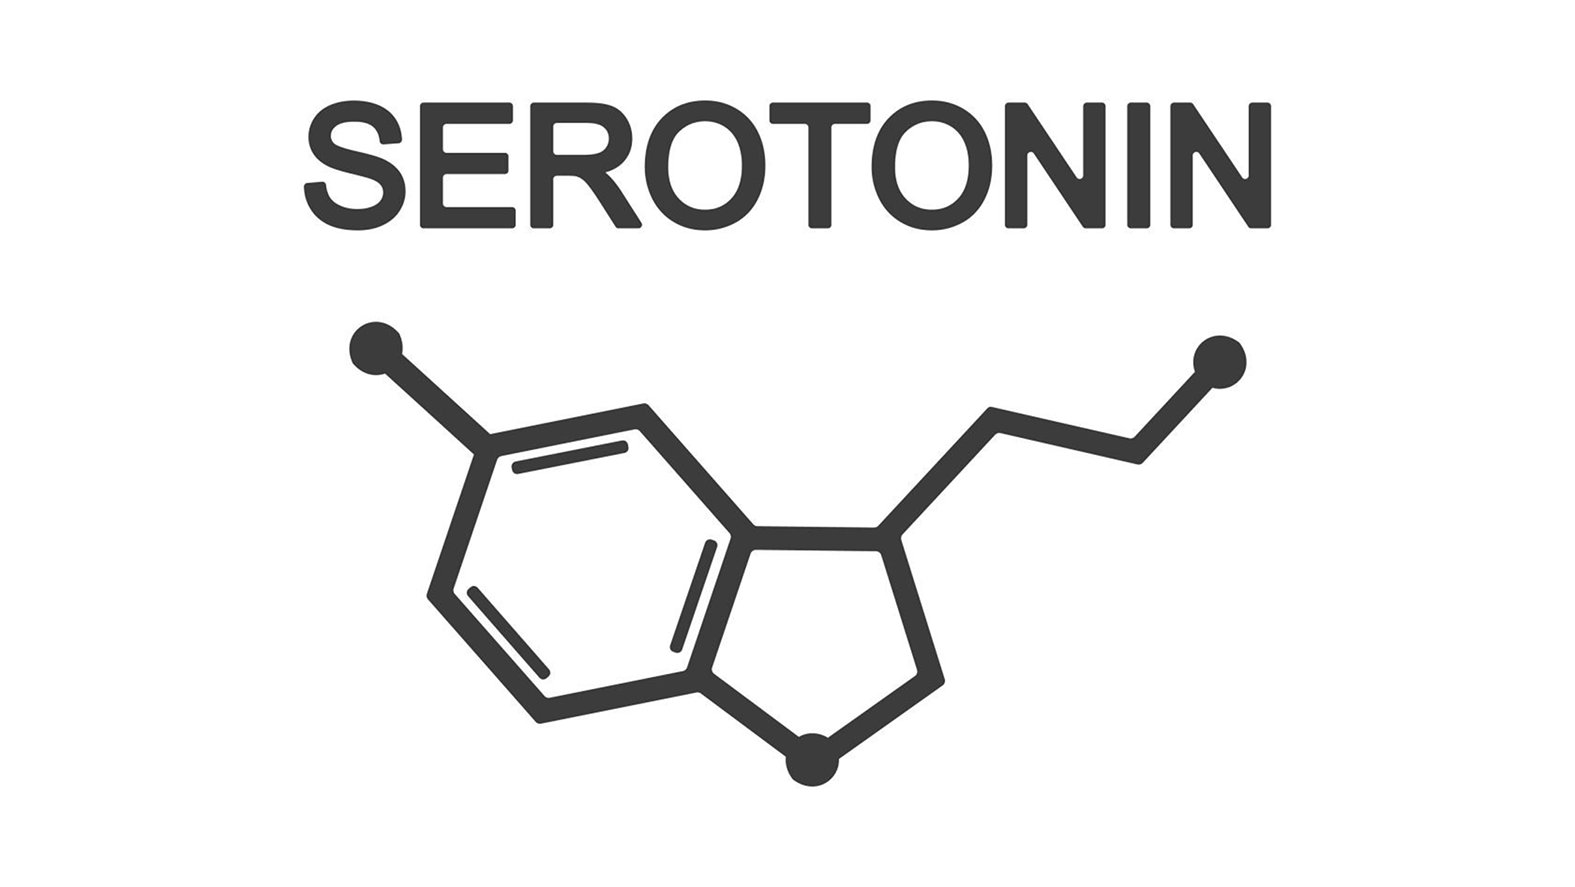 Depression and Serotonin: New Study Questions Connections